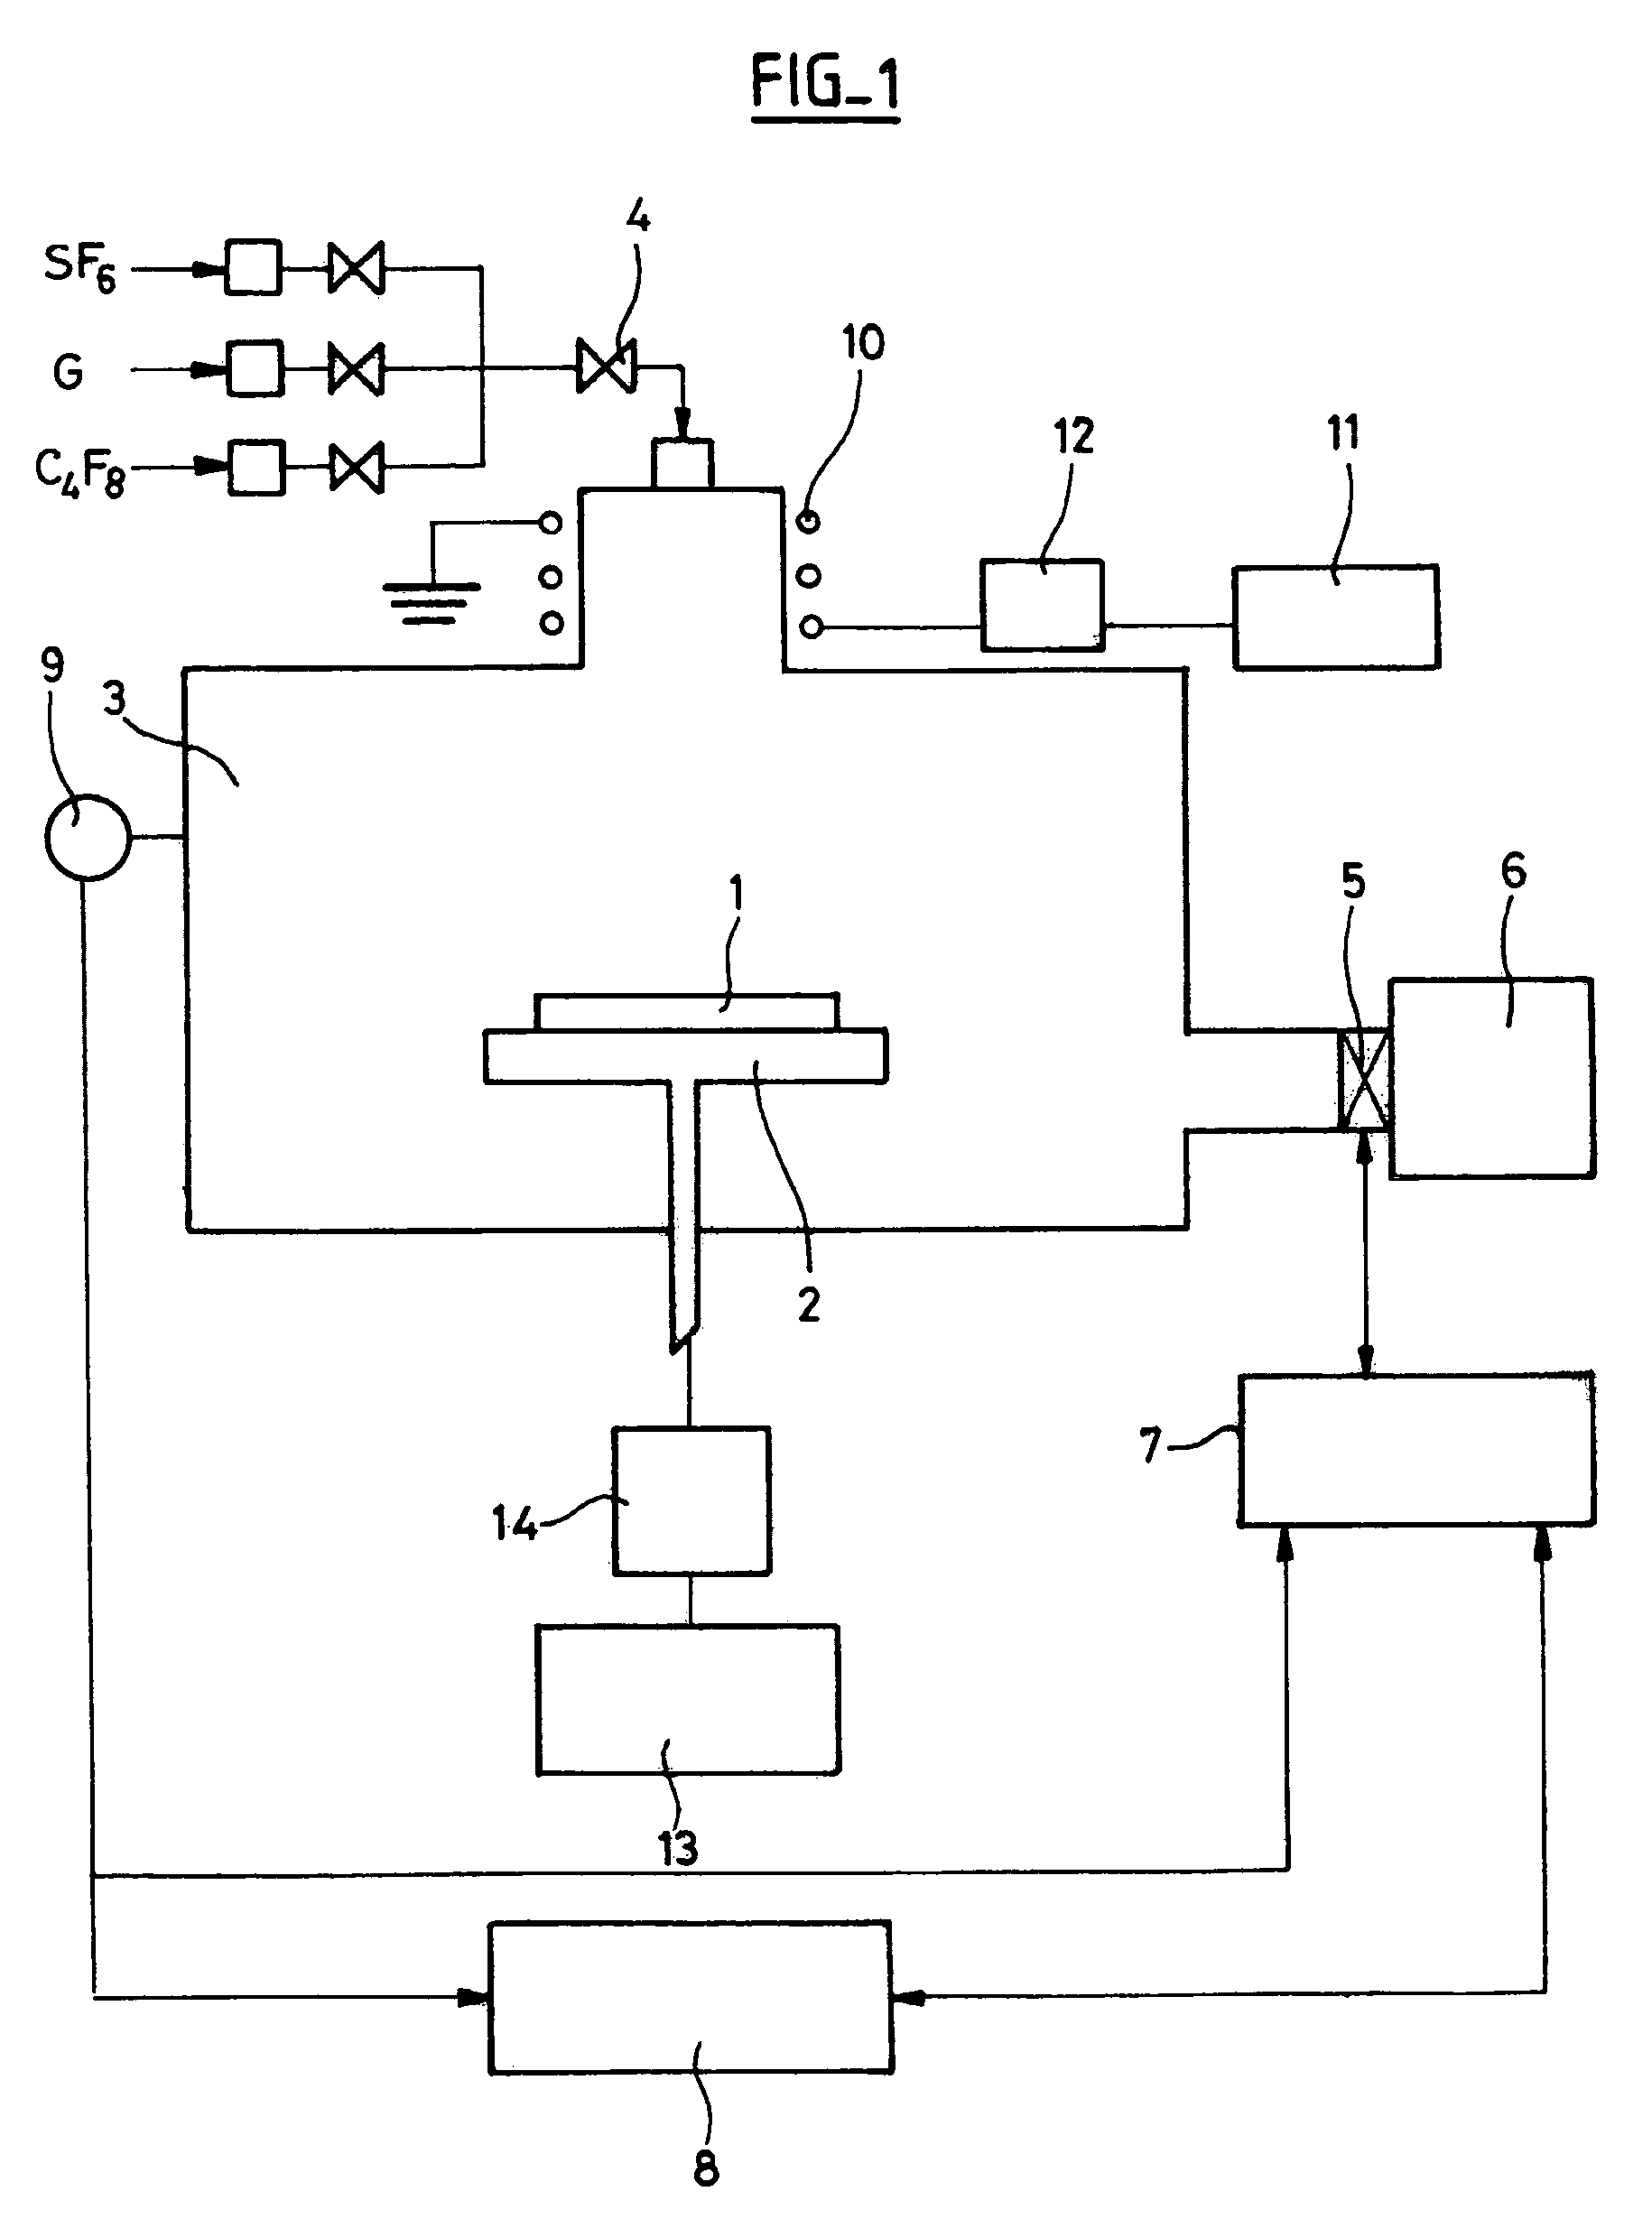 Method of controlling the pressure in a process chamber